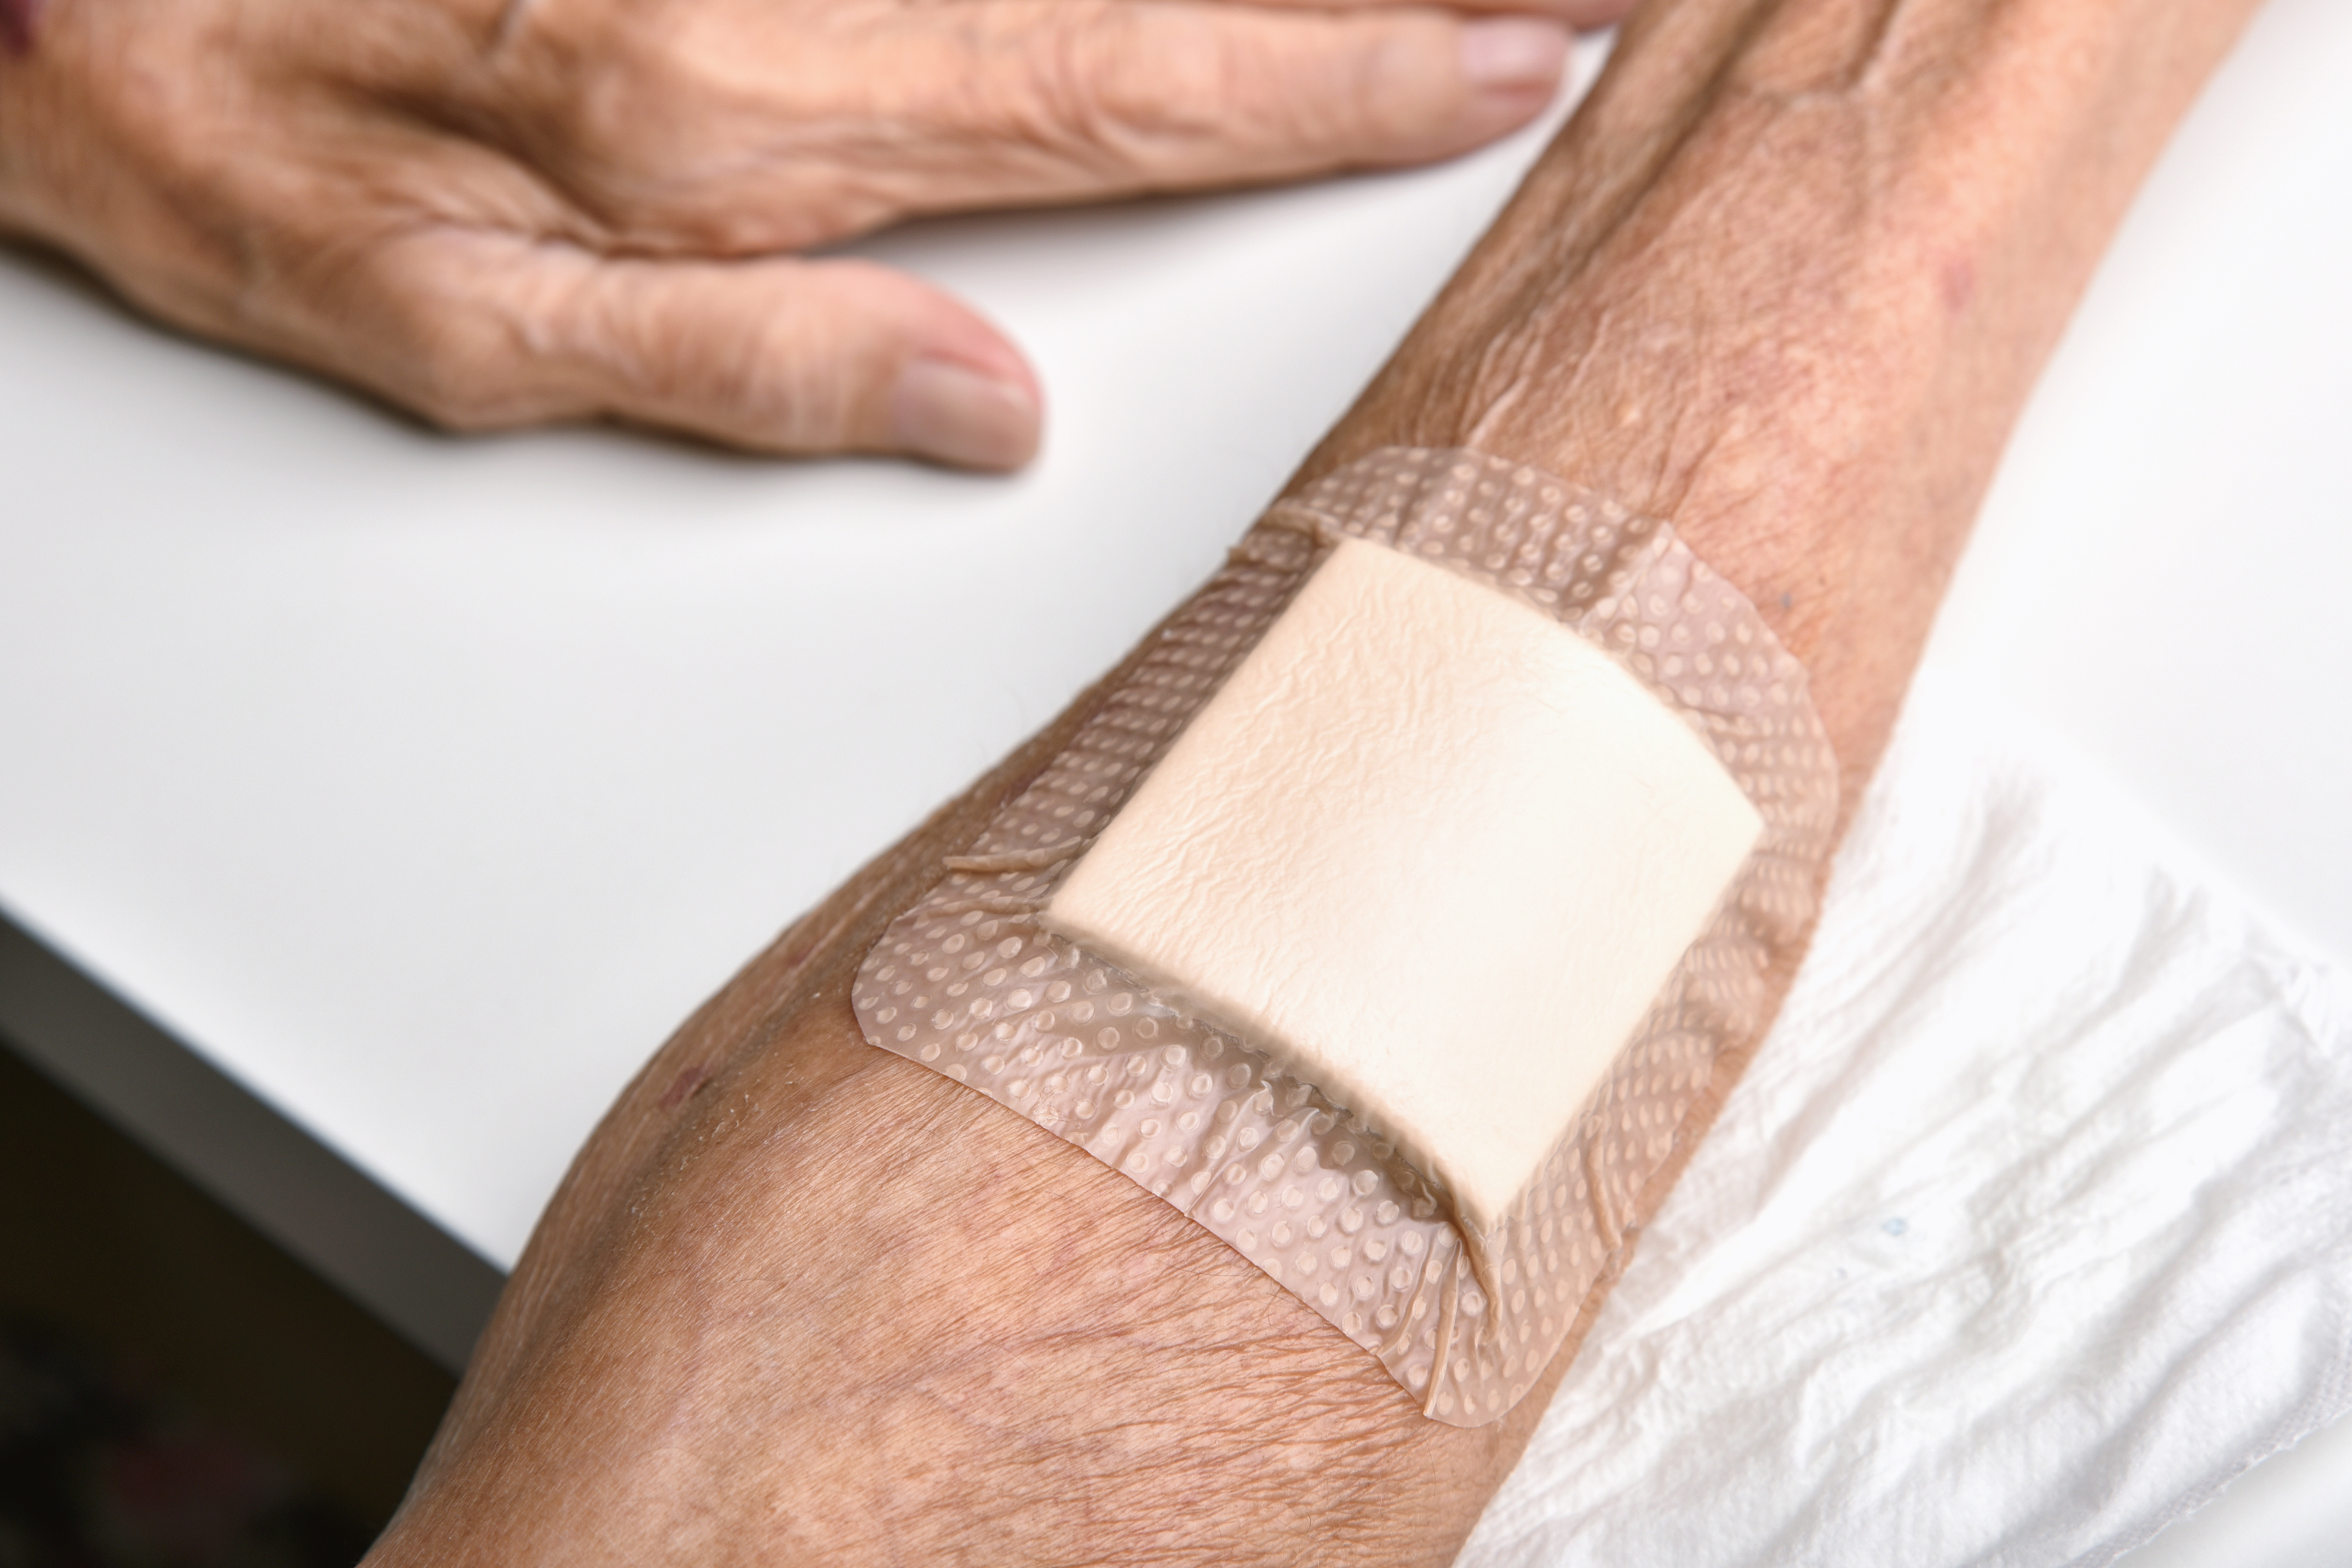 Nurturing Healing: The Remarkable Benefits of Diabetes Wound Care